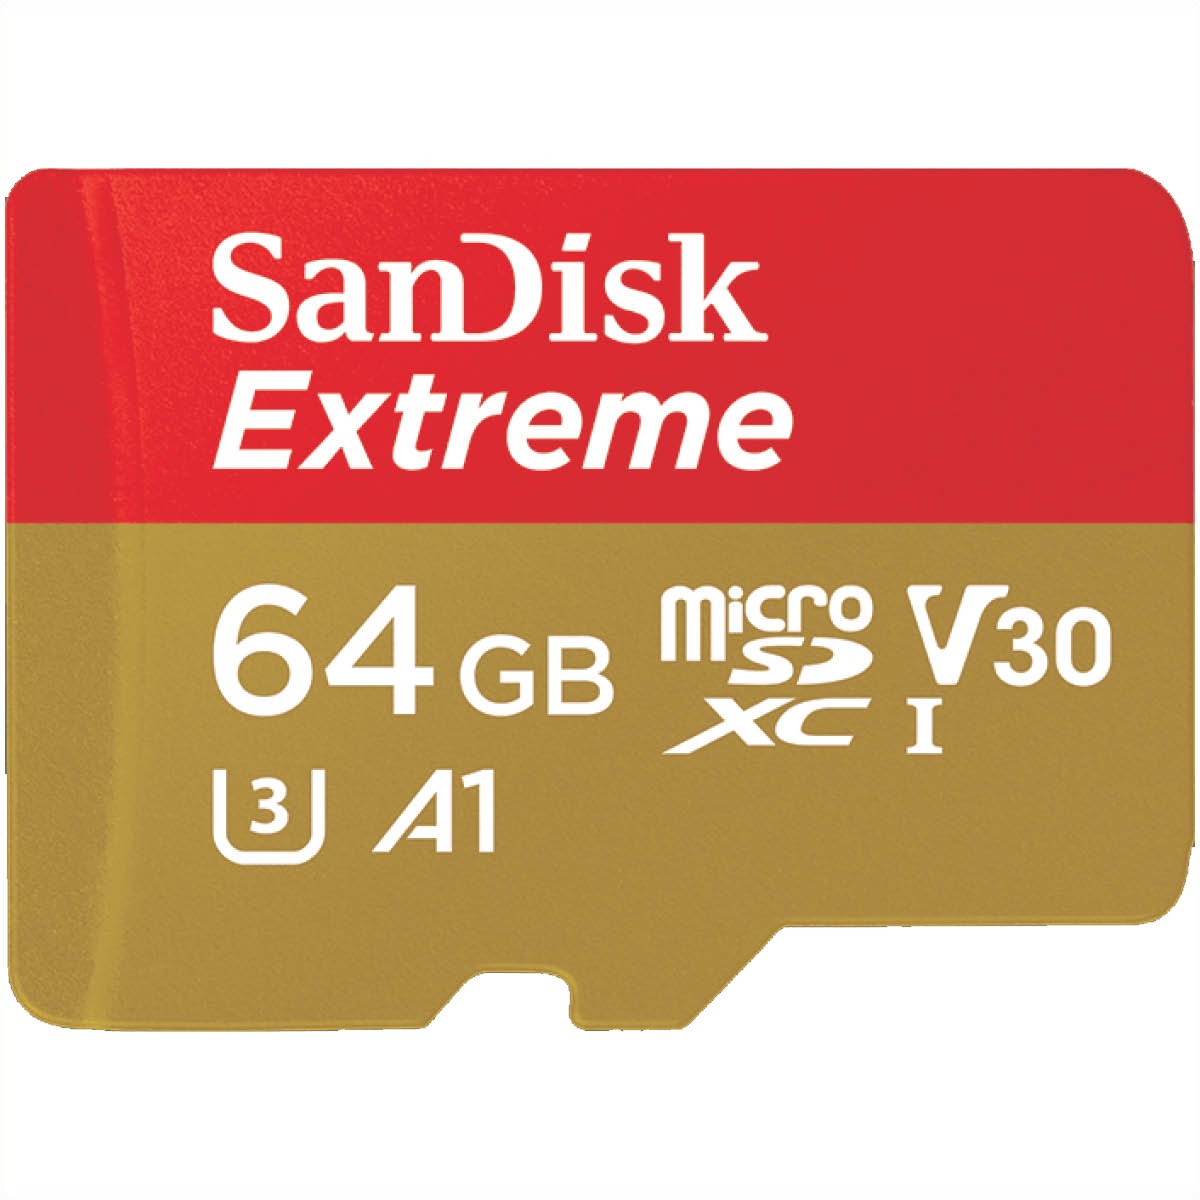 SanDisk 64 GB Micro SDHC Extreme 100MB